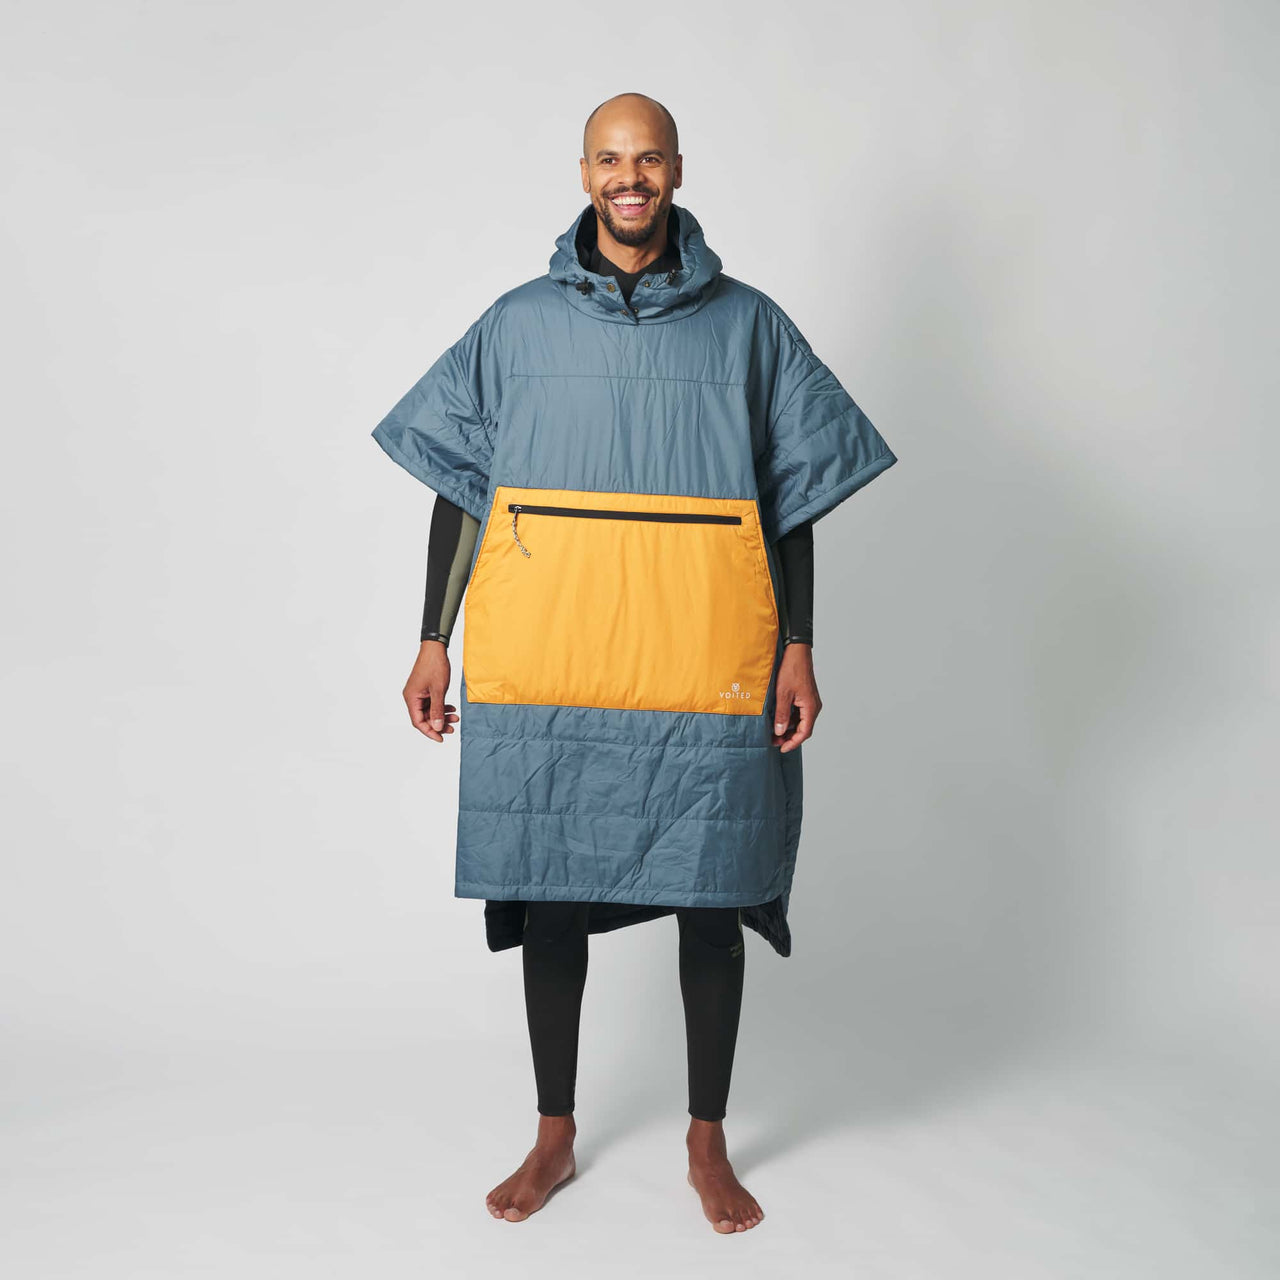 VOITED Surf Inspired Hooded Poncho with a Towel-Like Inside - Marsh Grey /  Desert – VOITED EU